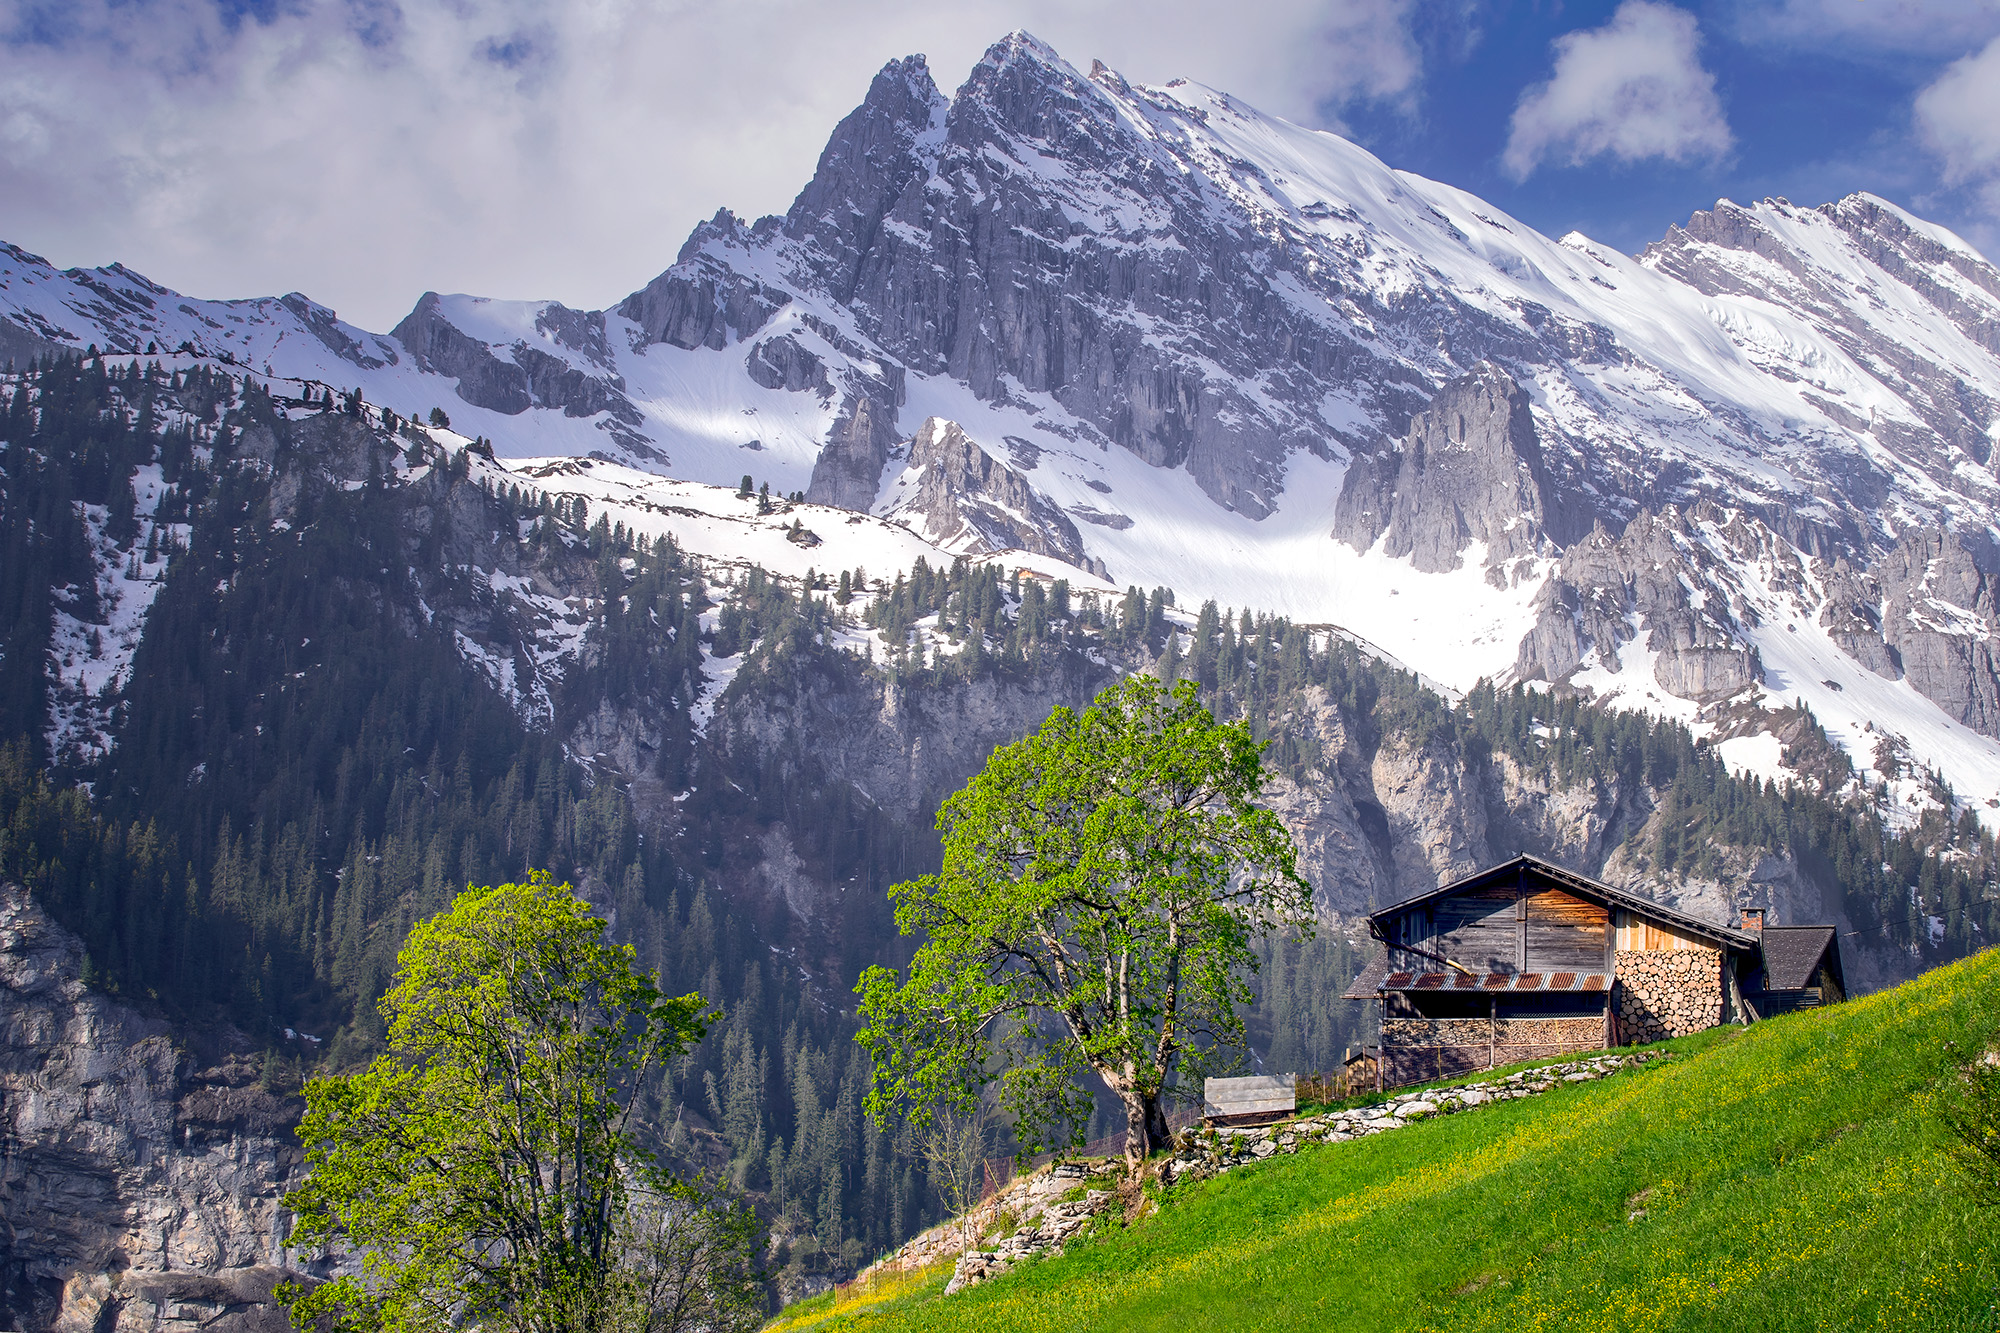 In the picturesque embrace of Switzerland, "Alpine Enchantment" unveils the realization of a fairy tale. As my friend Scott foretold...